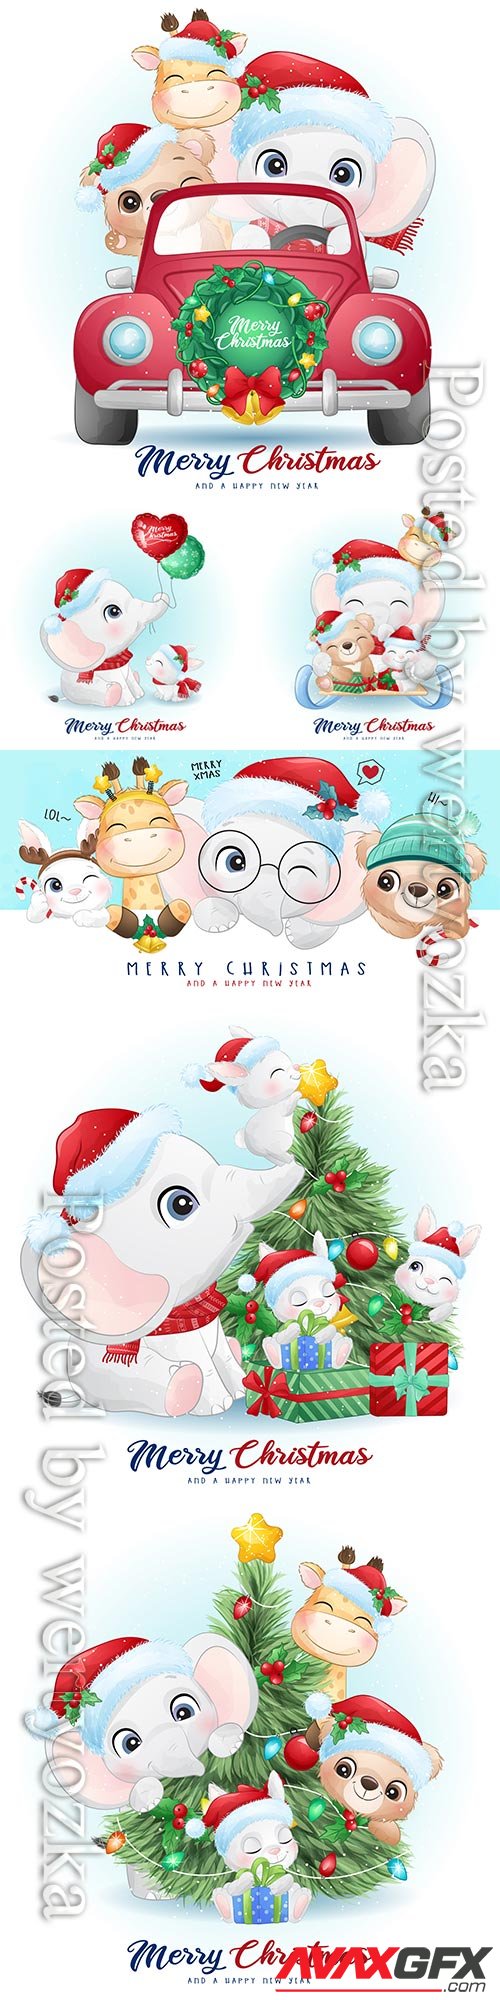 Cute doodle animals for christmas day with watercolor vector illustration